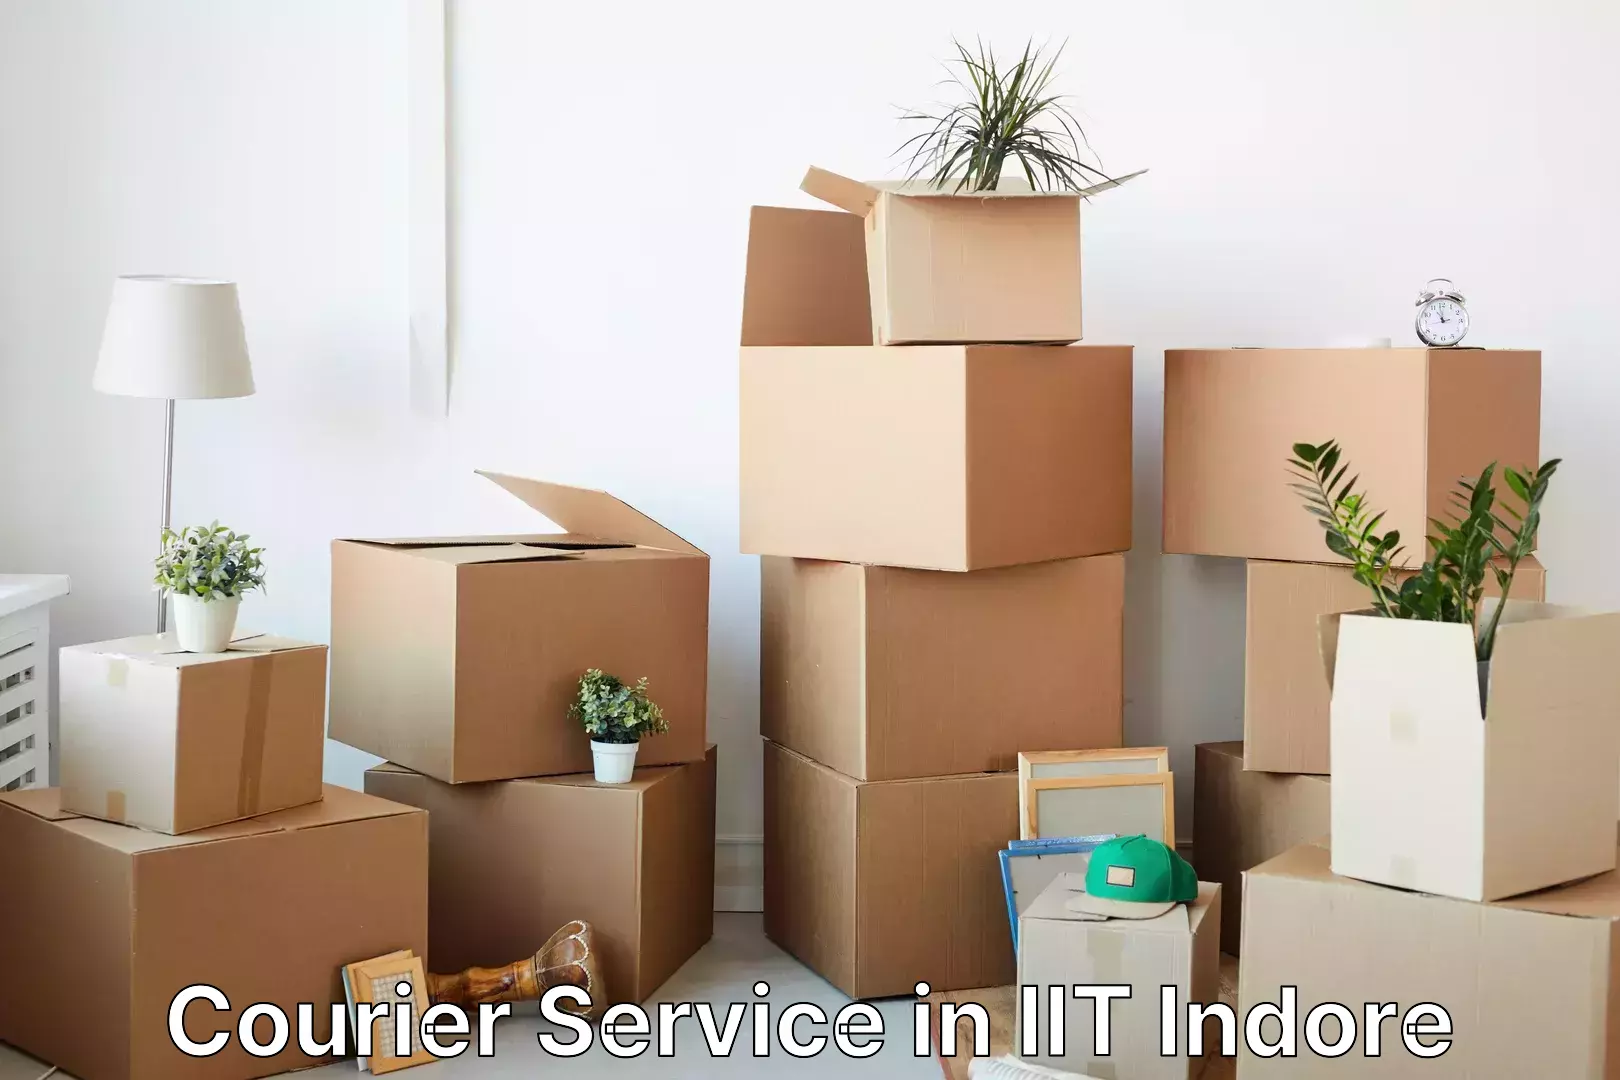 Customizable delivery plans in IIT Indore